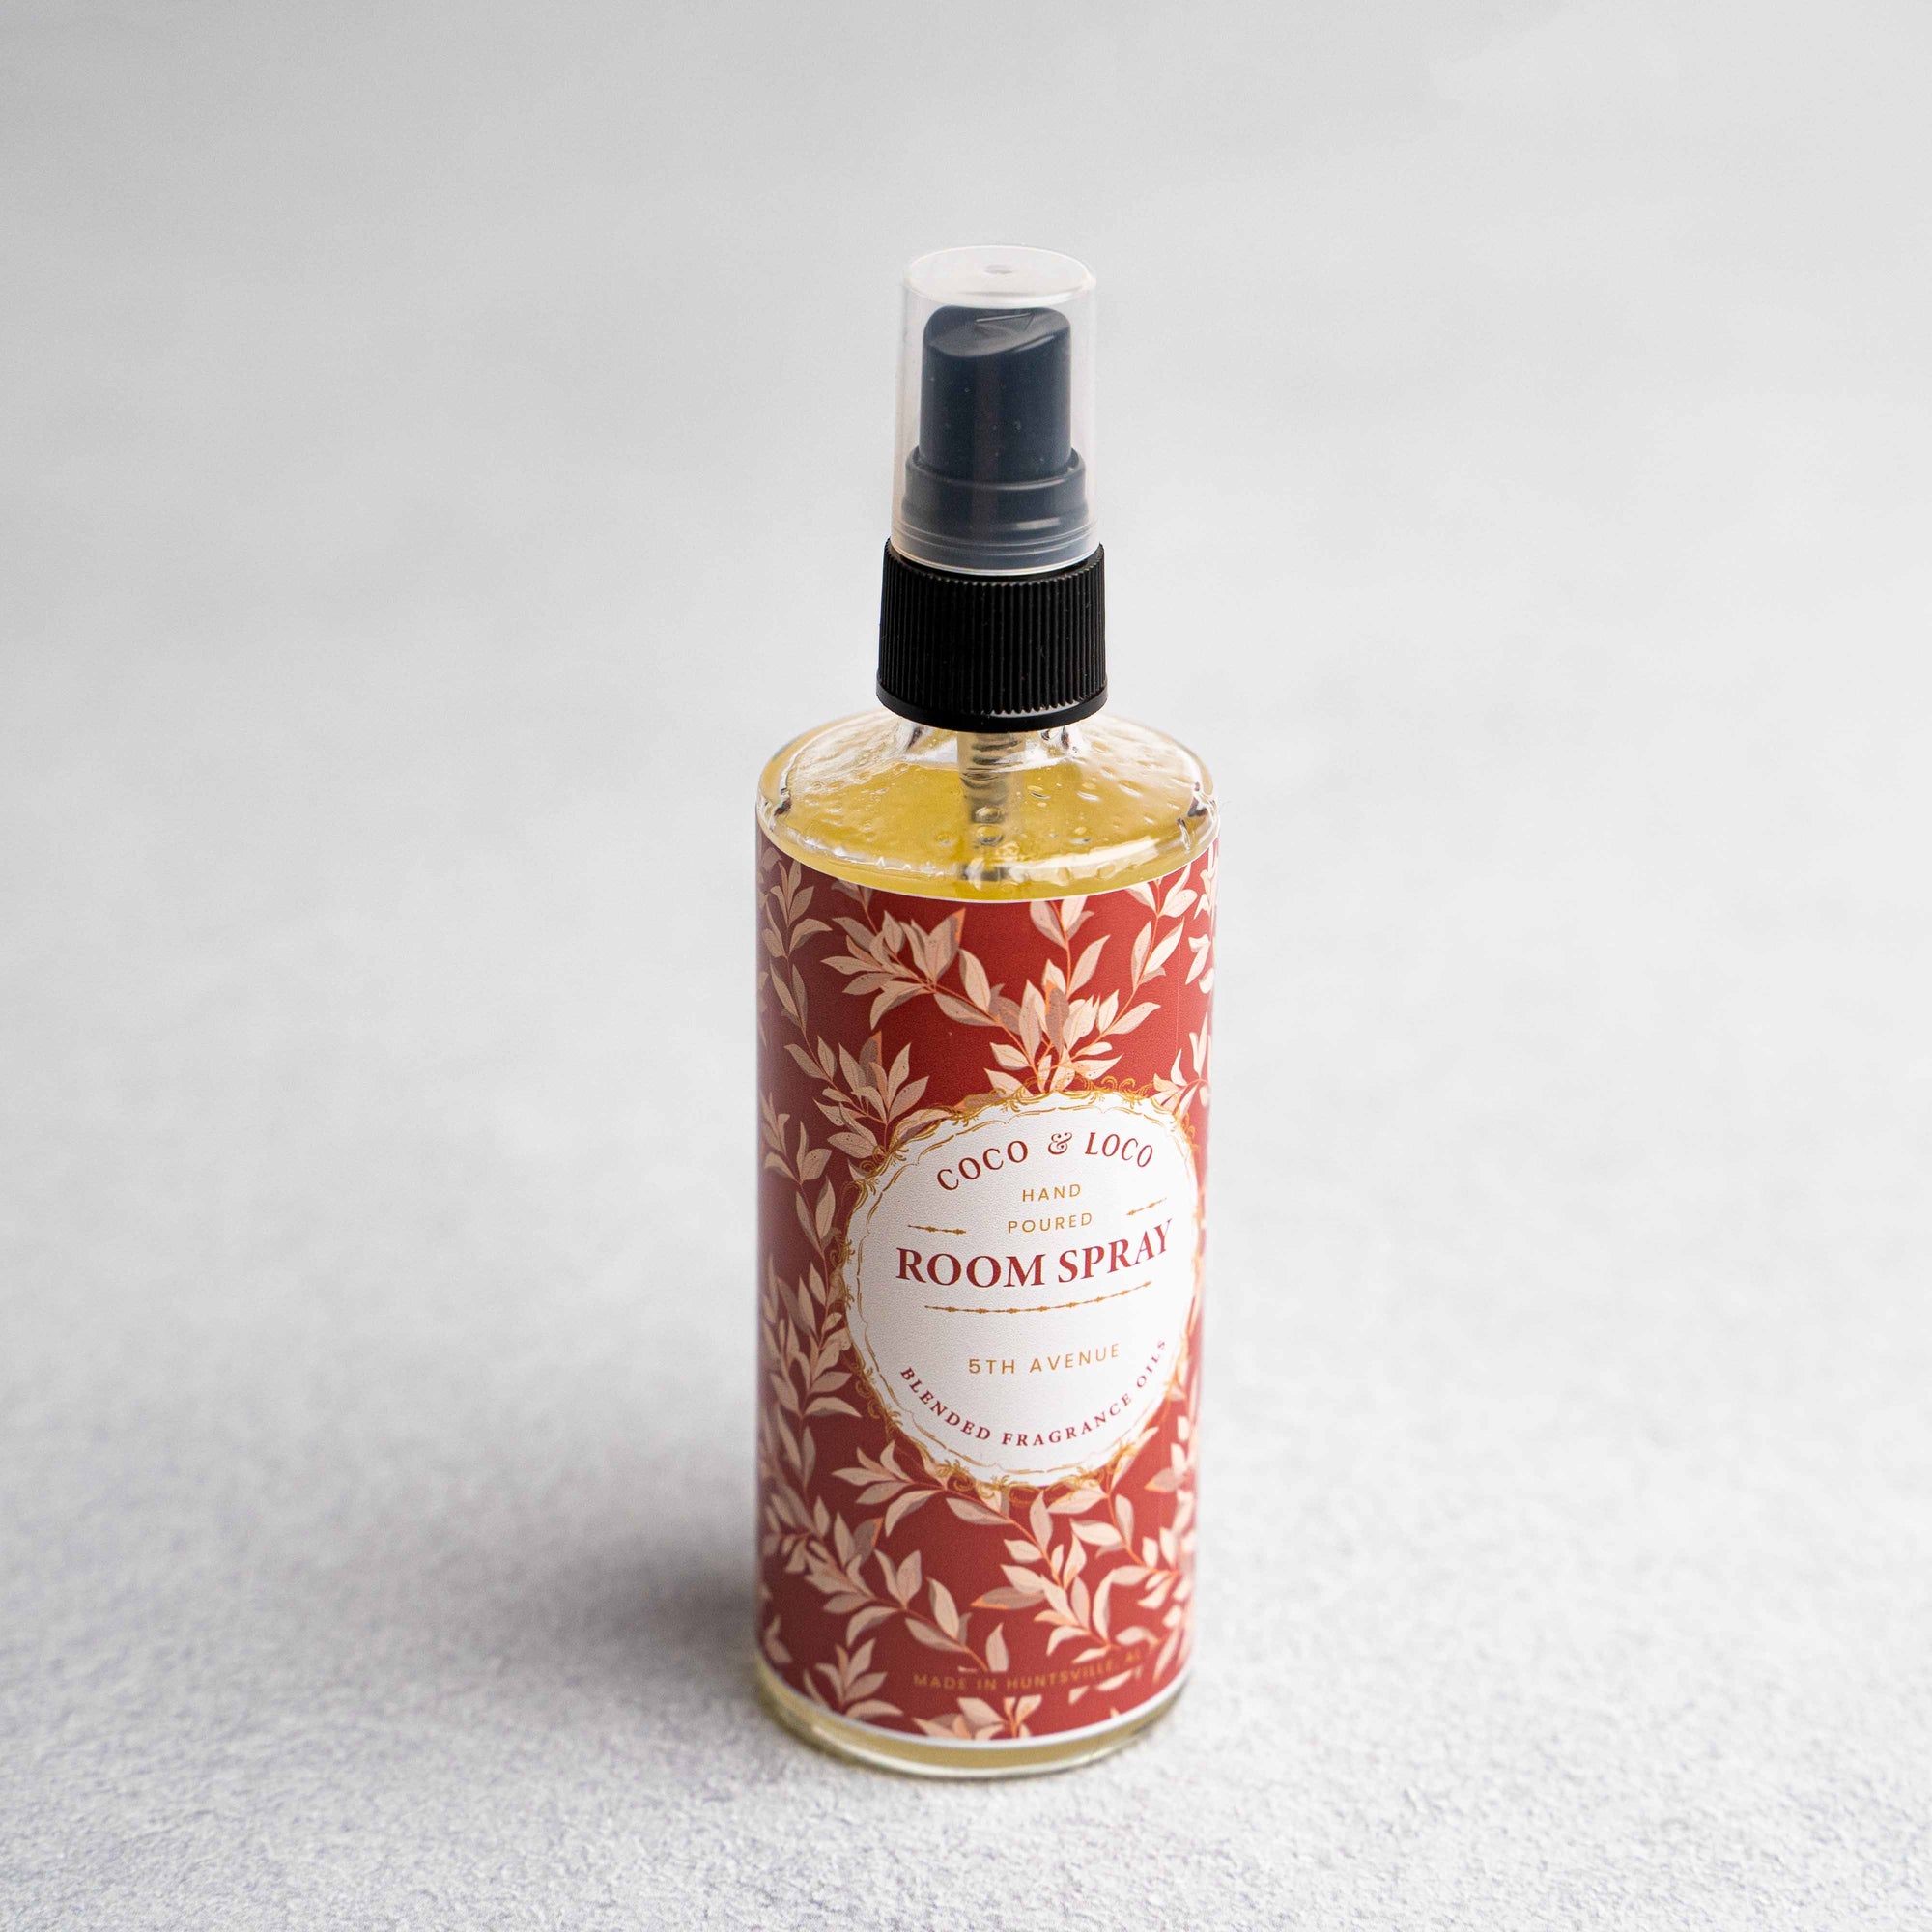 5th Avenue scented room spray by Coco & Loco at Holtz Leather Co